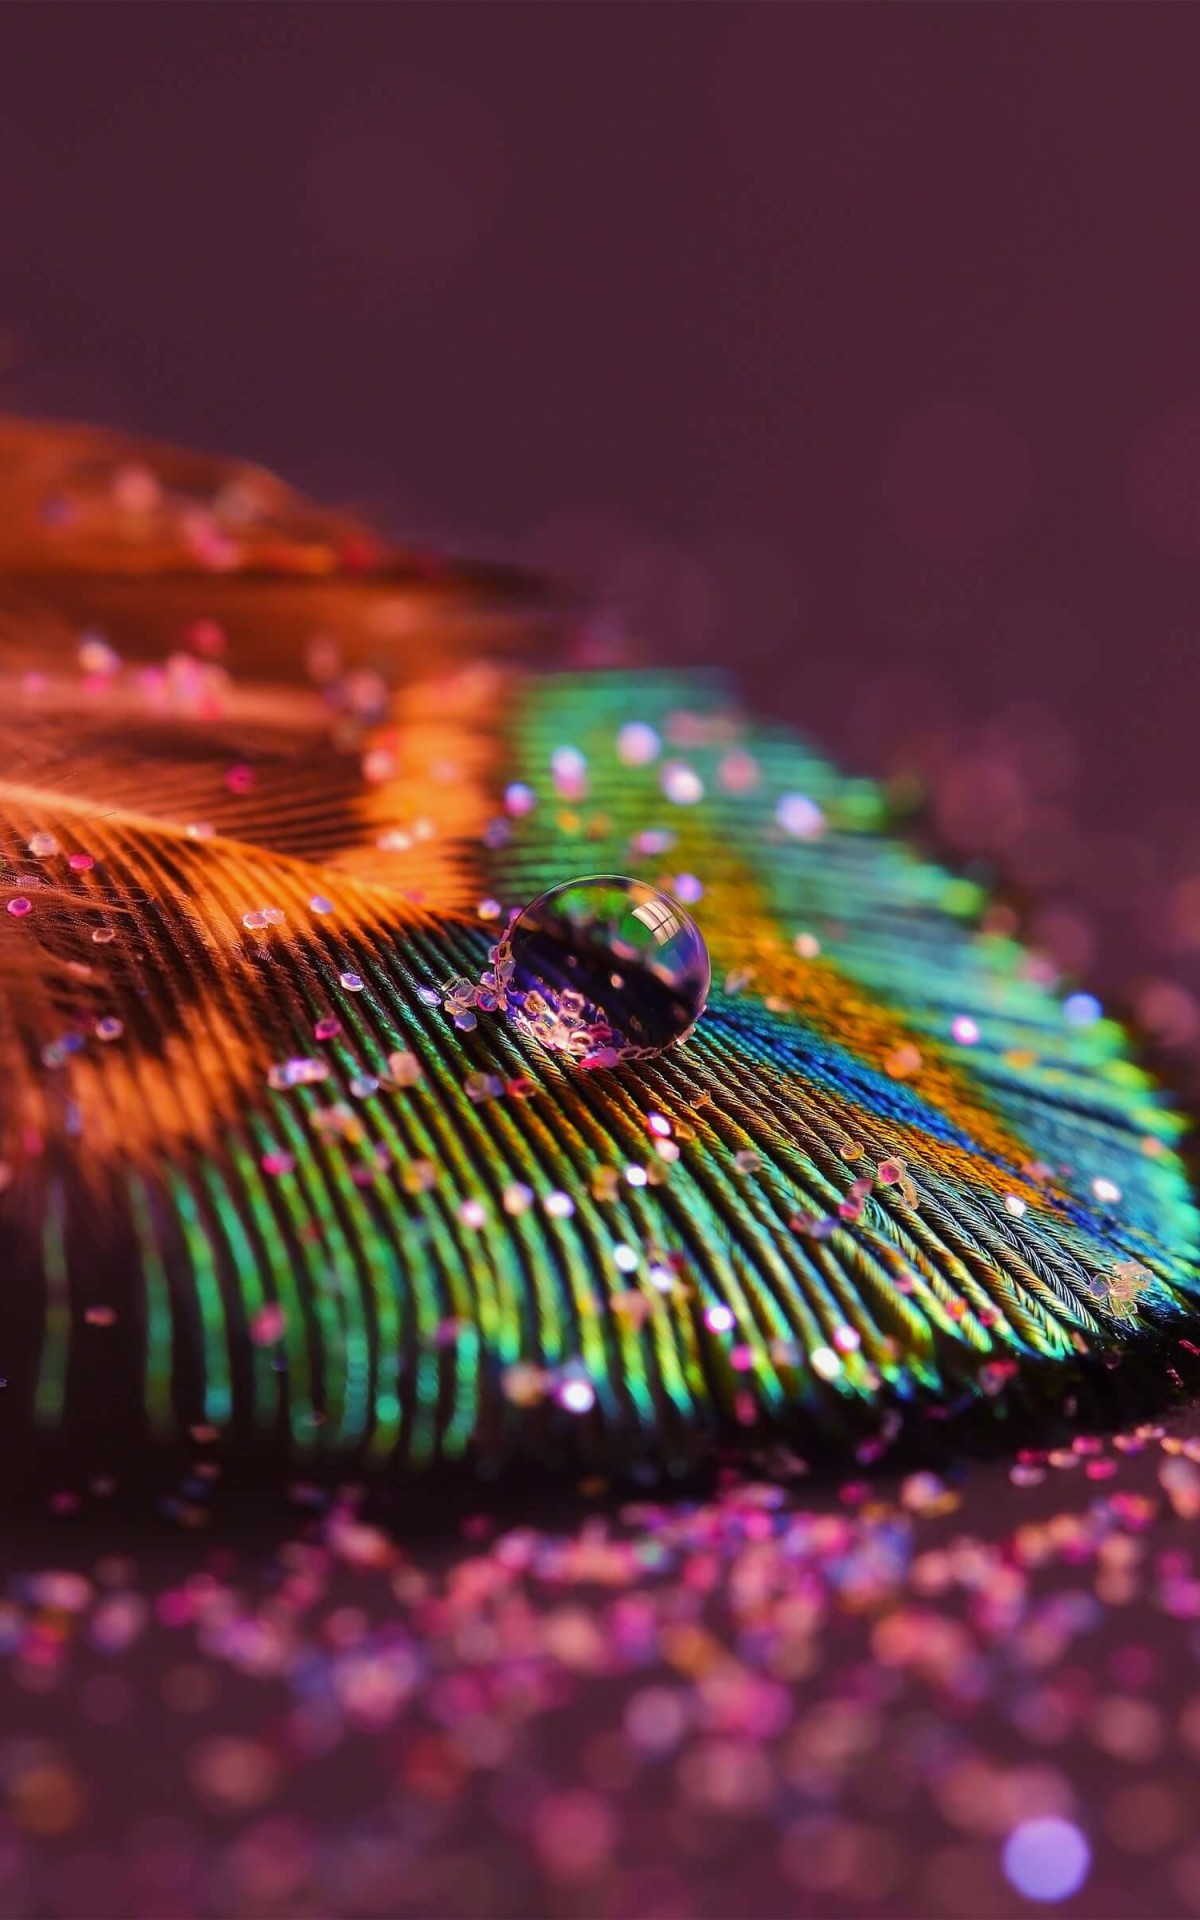 Colorful Feather HD Wallpaper For Kindle Fire HDx HDwallpaper